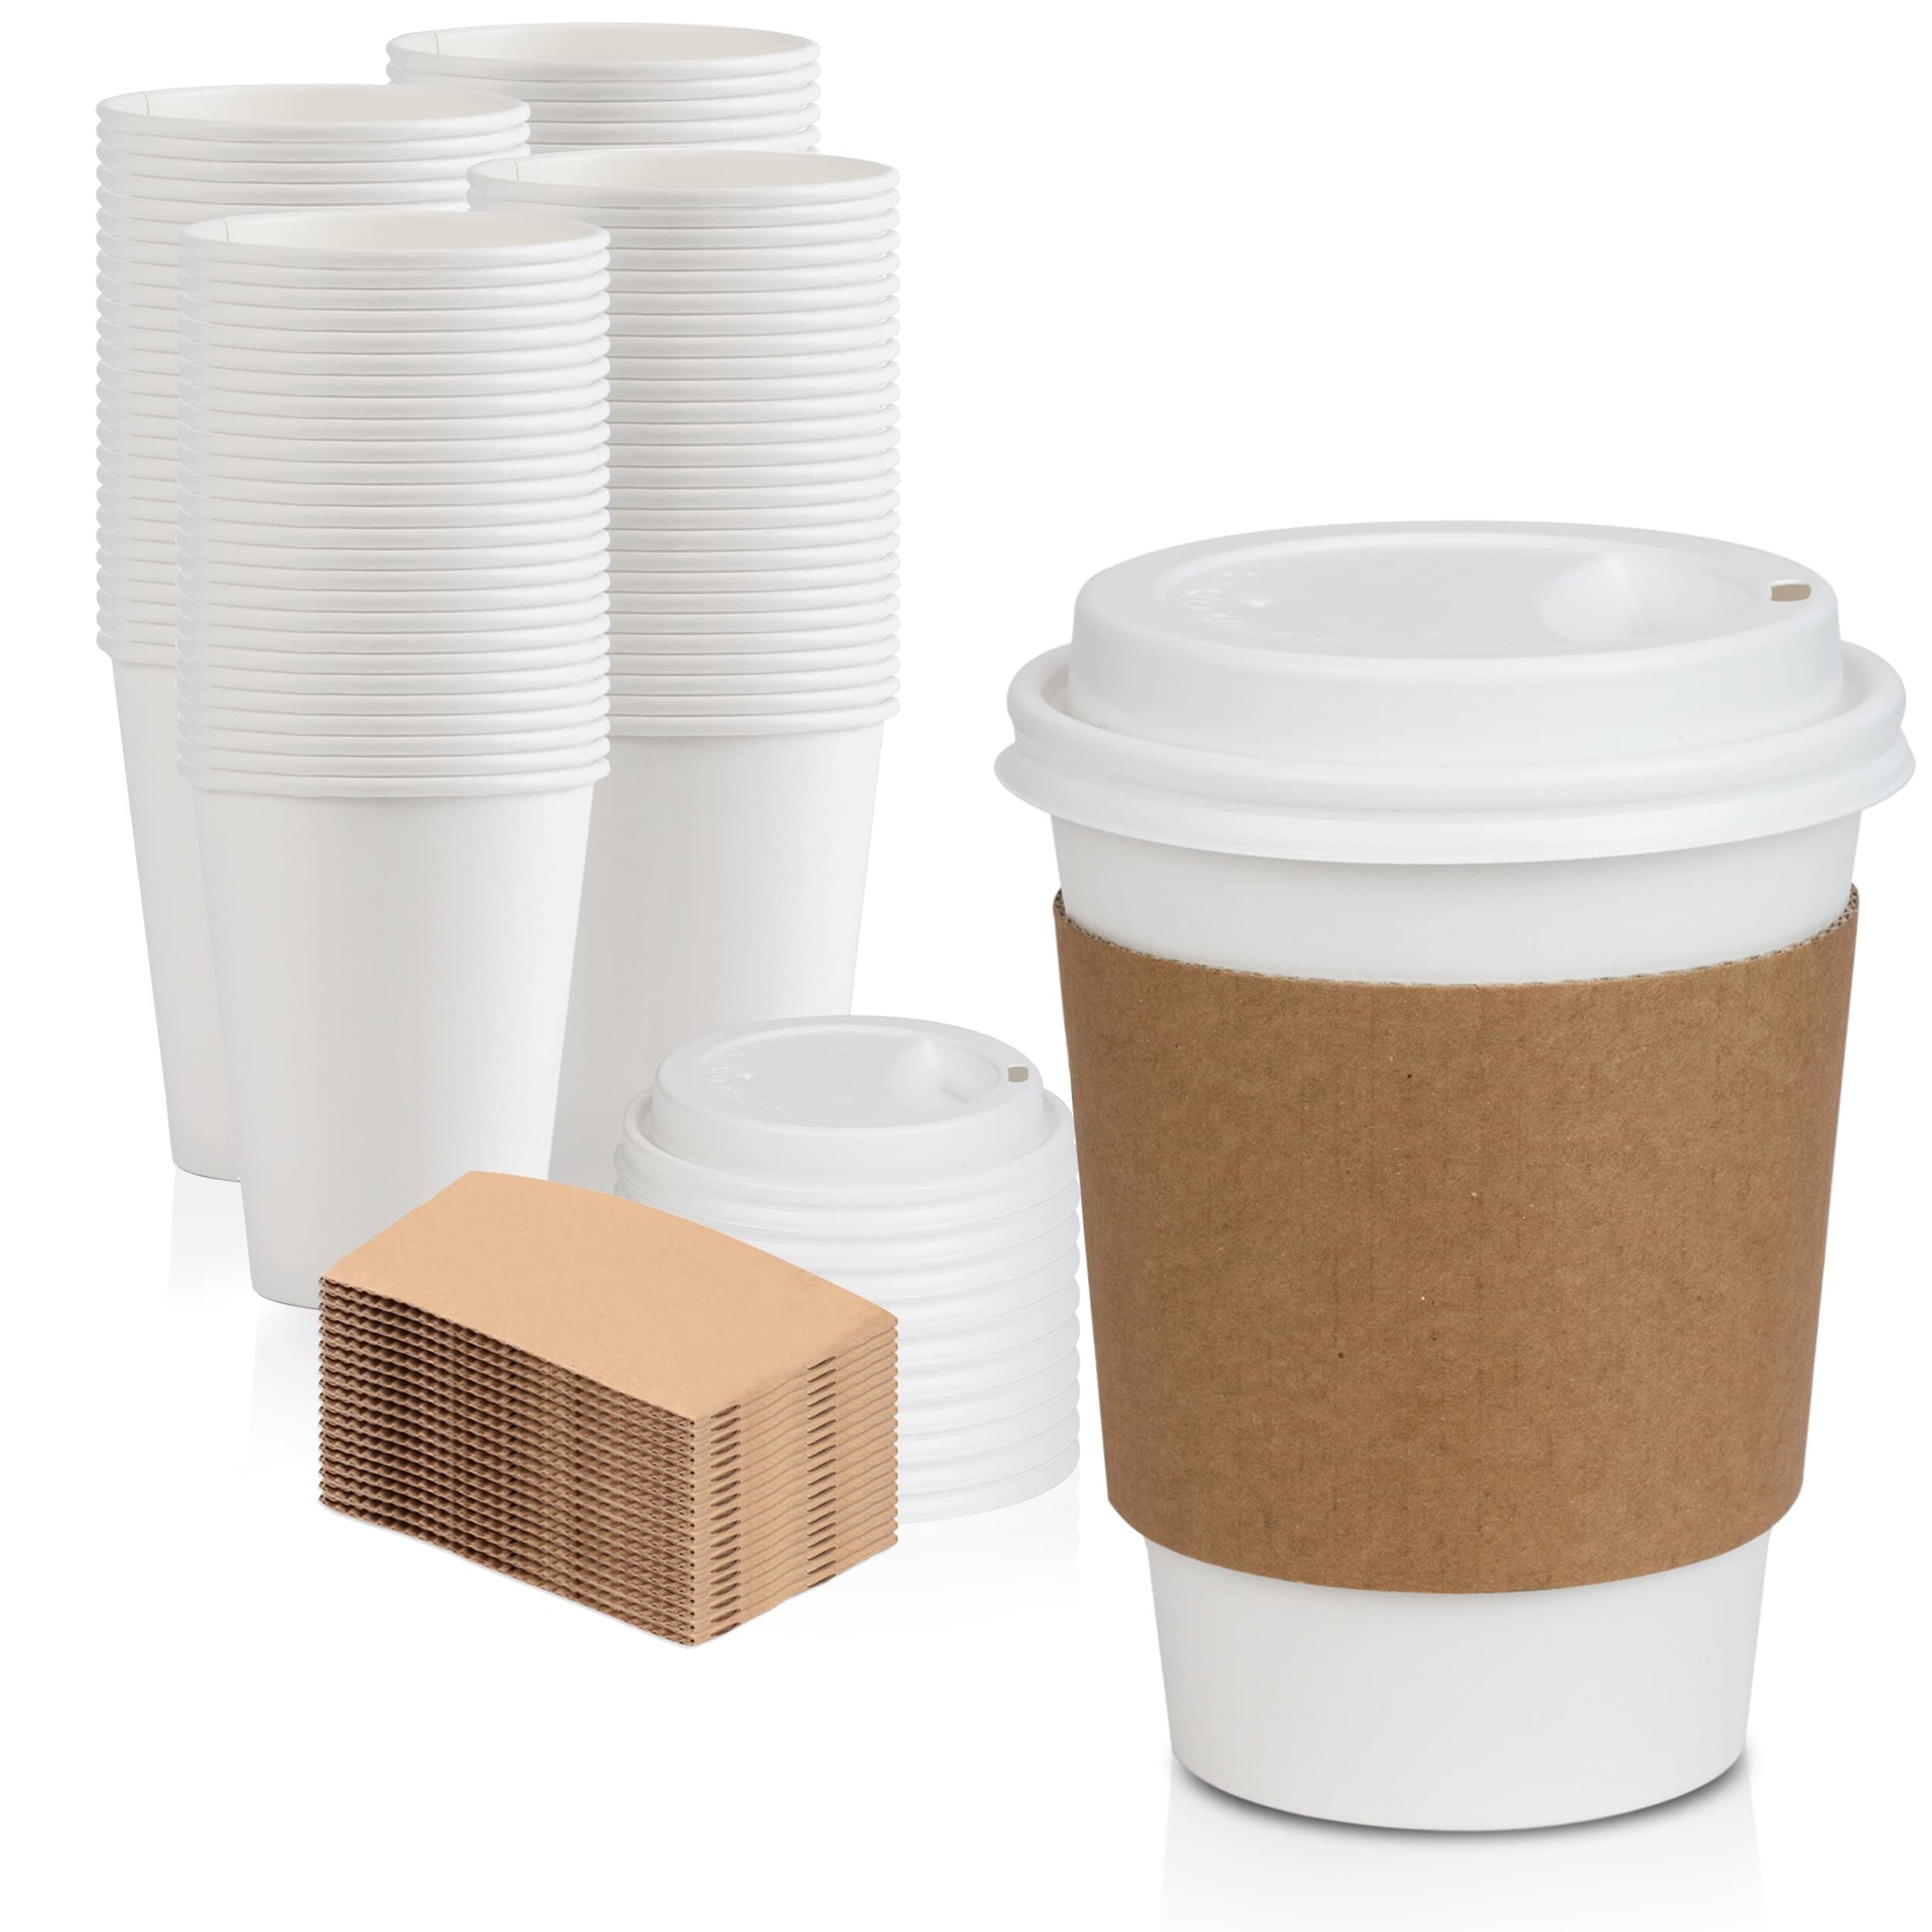 100-Pack 7oz White Paper Disposable Cups – Hot / Cold Beverage Drinking Cup  for Water, Juice, Coffee or Tea – Ideal for Water Coolers, Party, or Coffee  